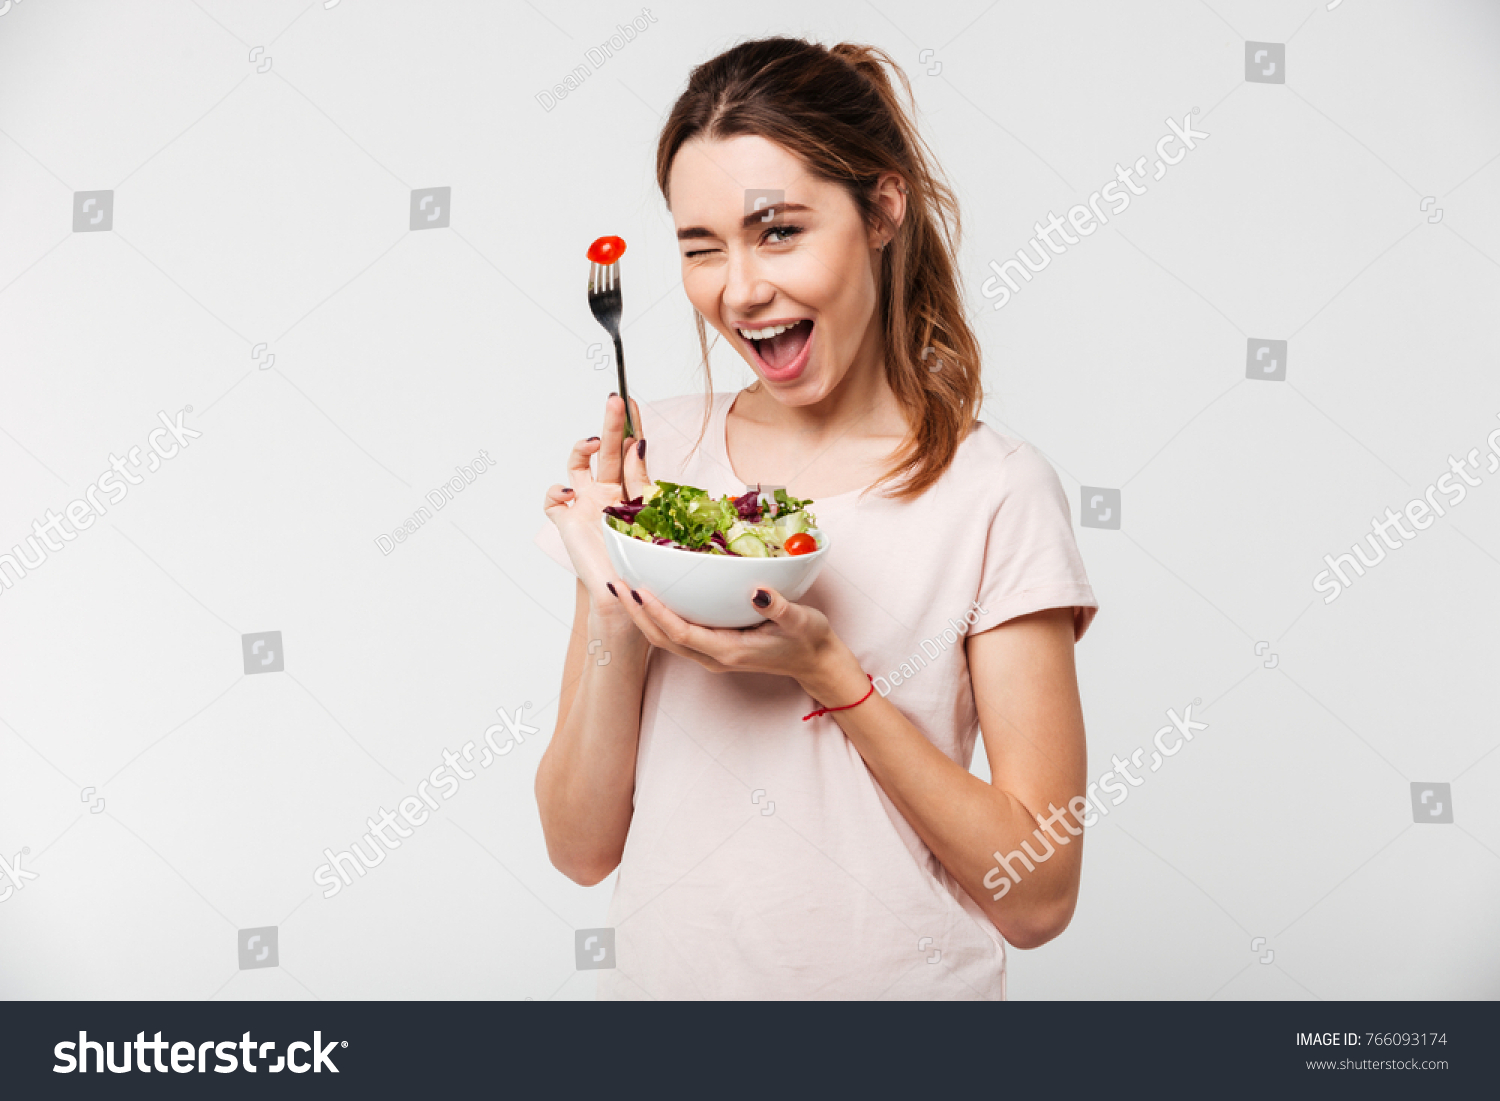 Portrait of a happy playful girl eating fresh salad from a bowl and winking isolated over white background